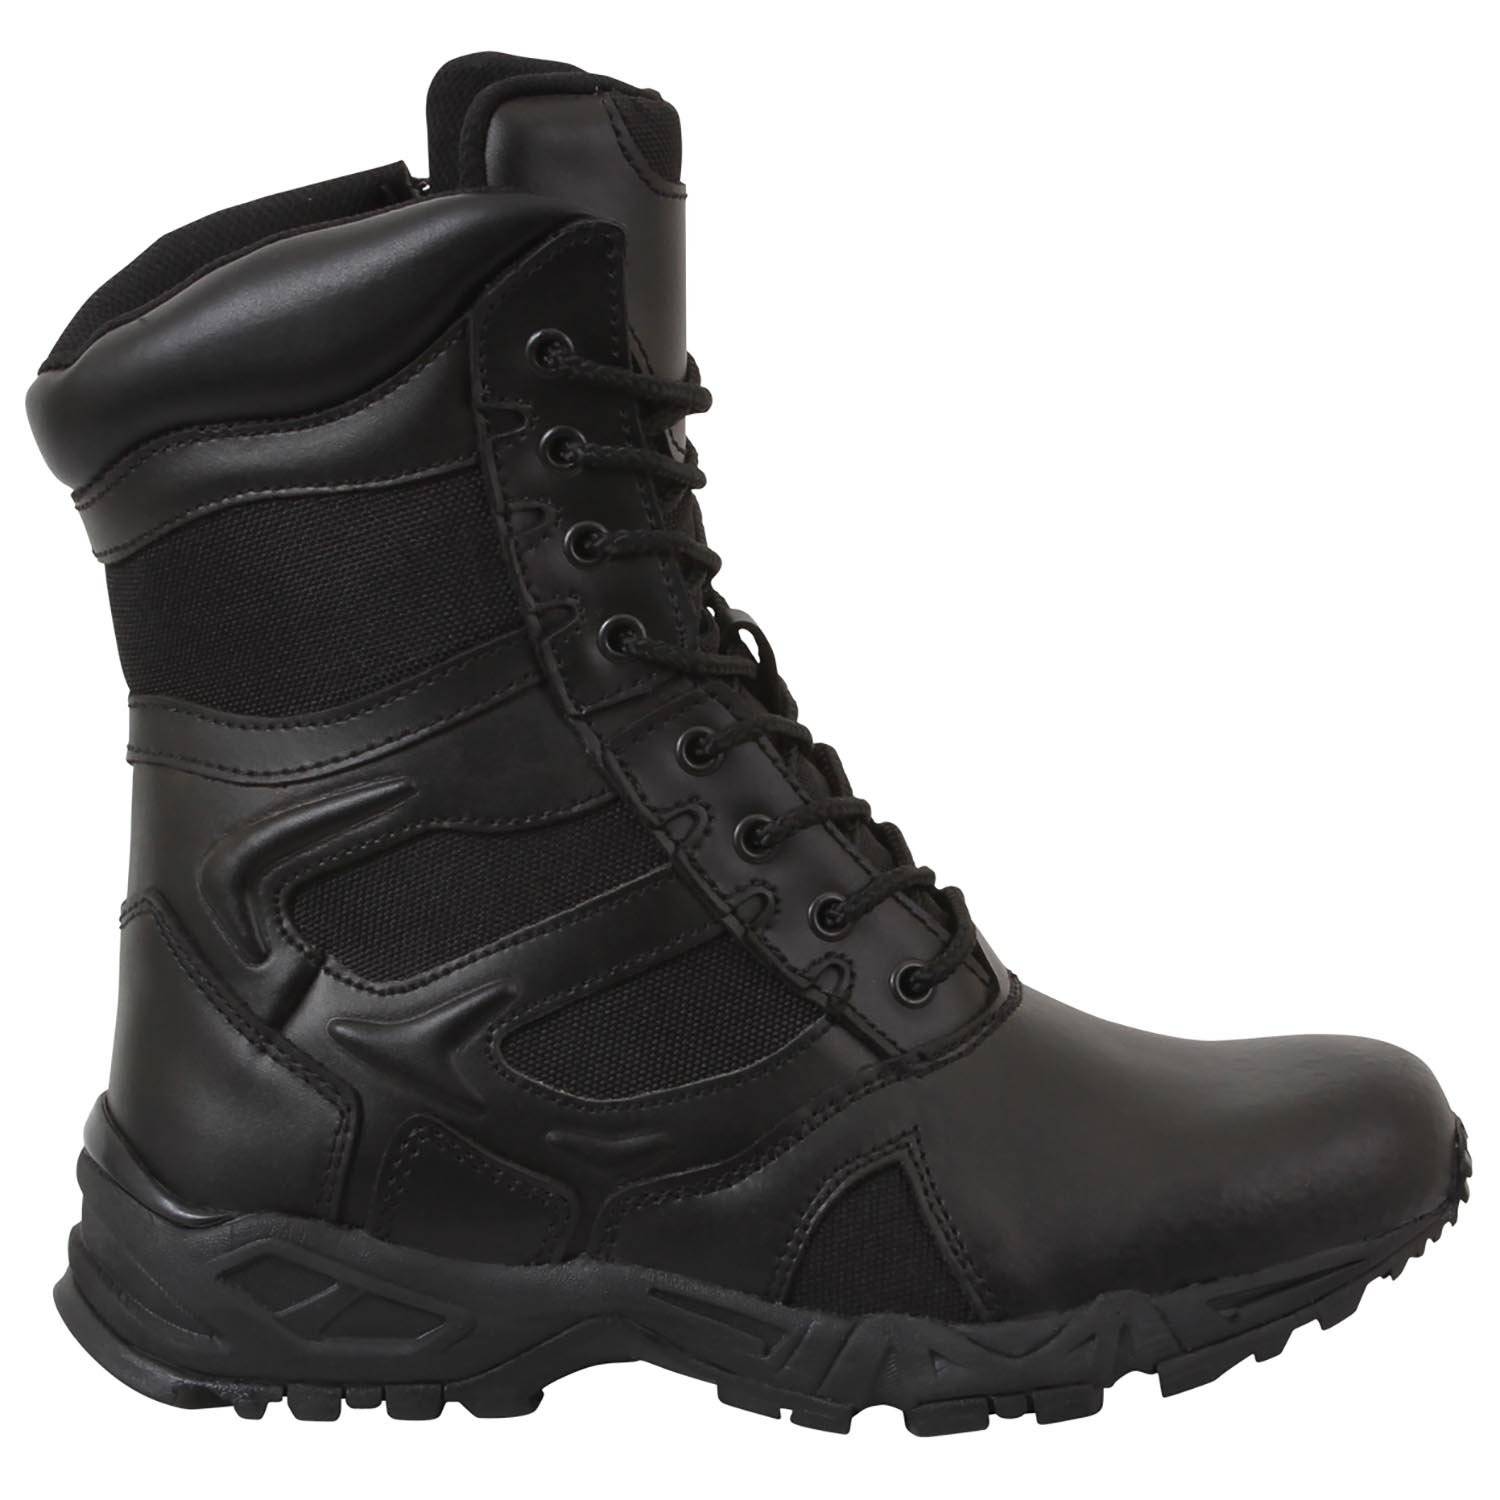 ROTHCO 8" FORCED ENTRY SIDE ZIP DEPLOYMENT BOOTS